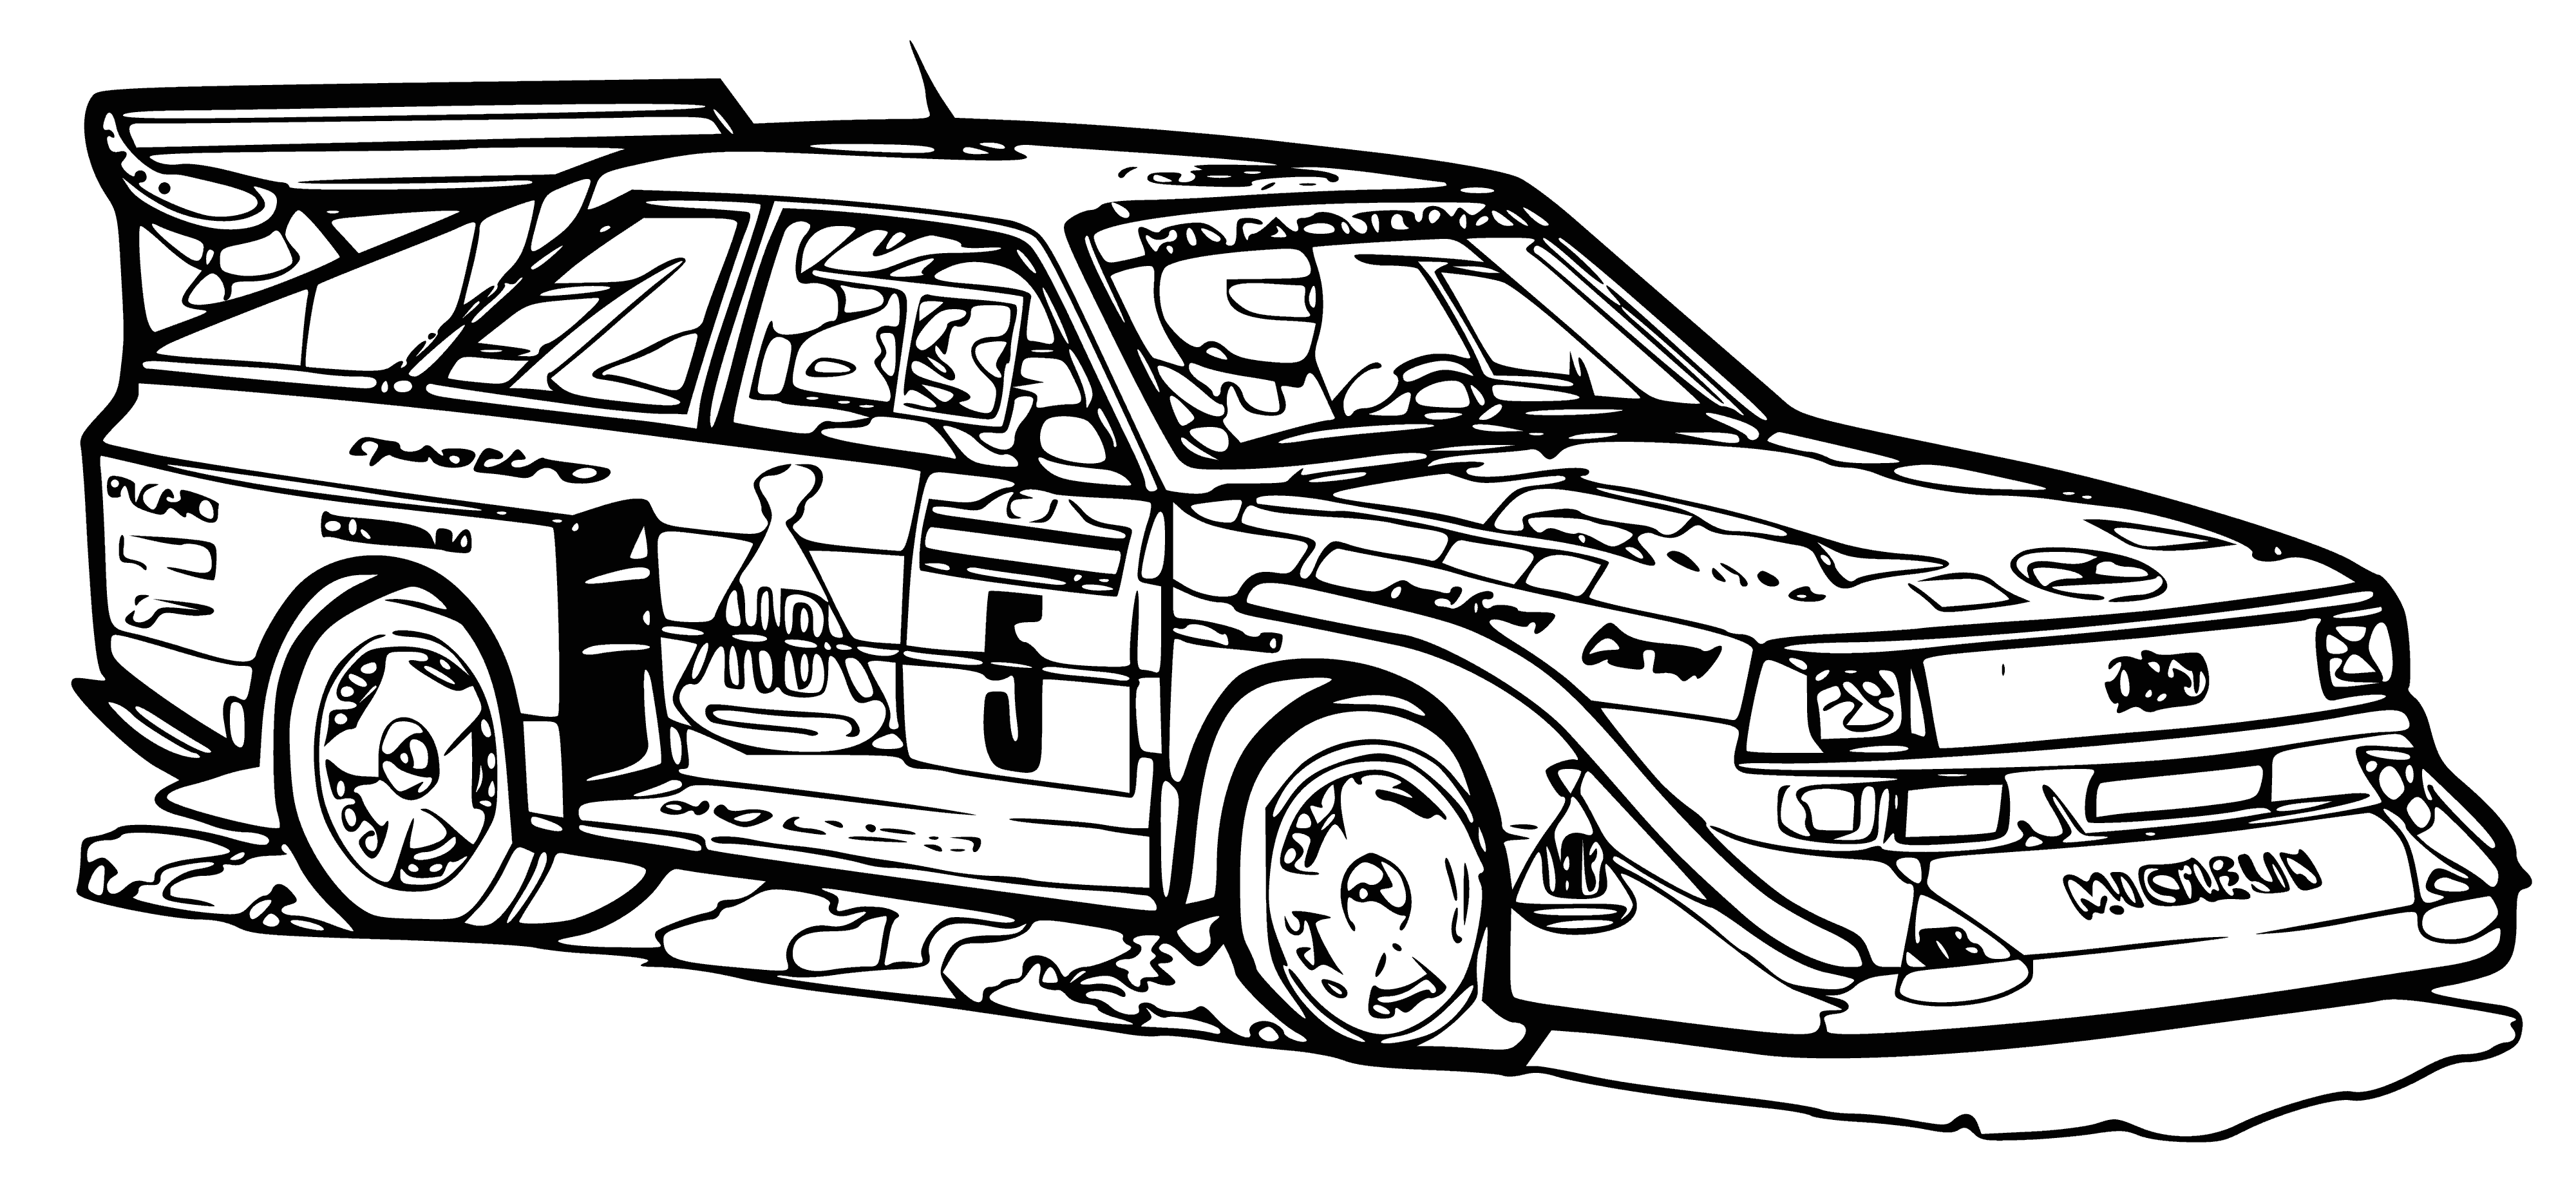 coloring page: Two cars race on a dirt rd, one in front of the other, hoods up. A tree in bg.